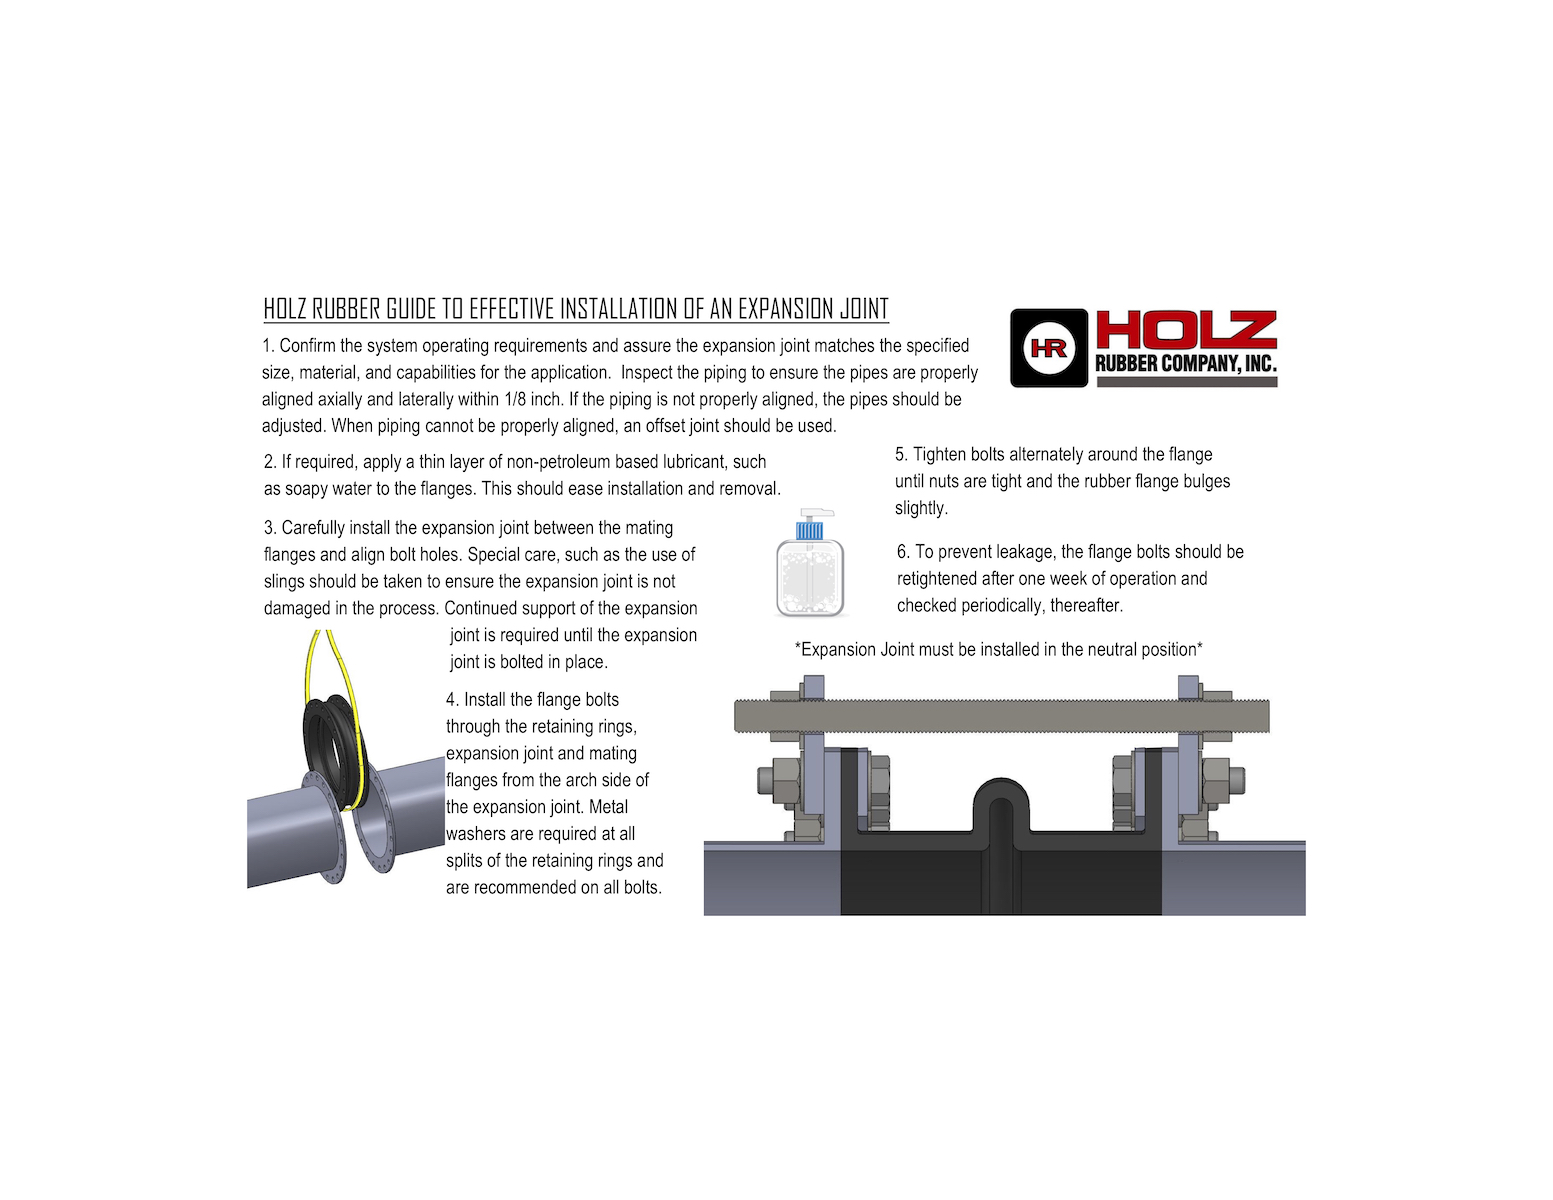 Holz Rubber Technical Support